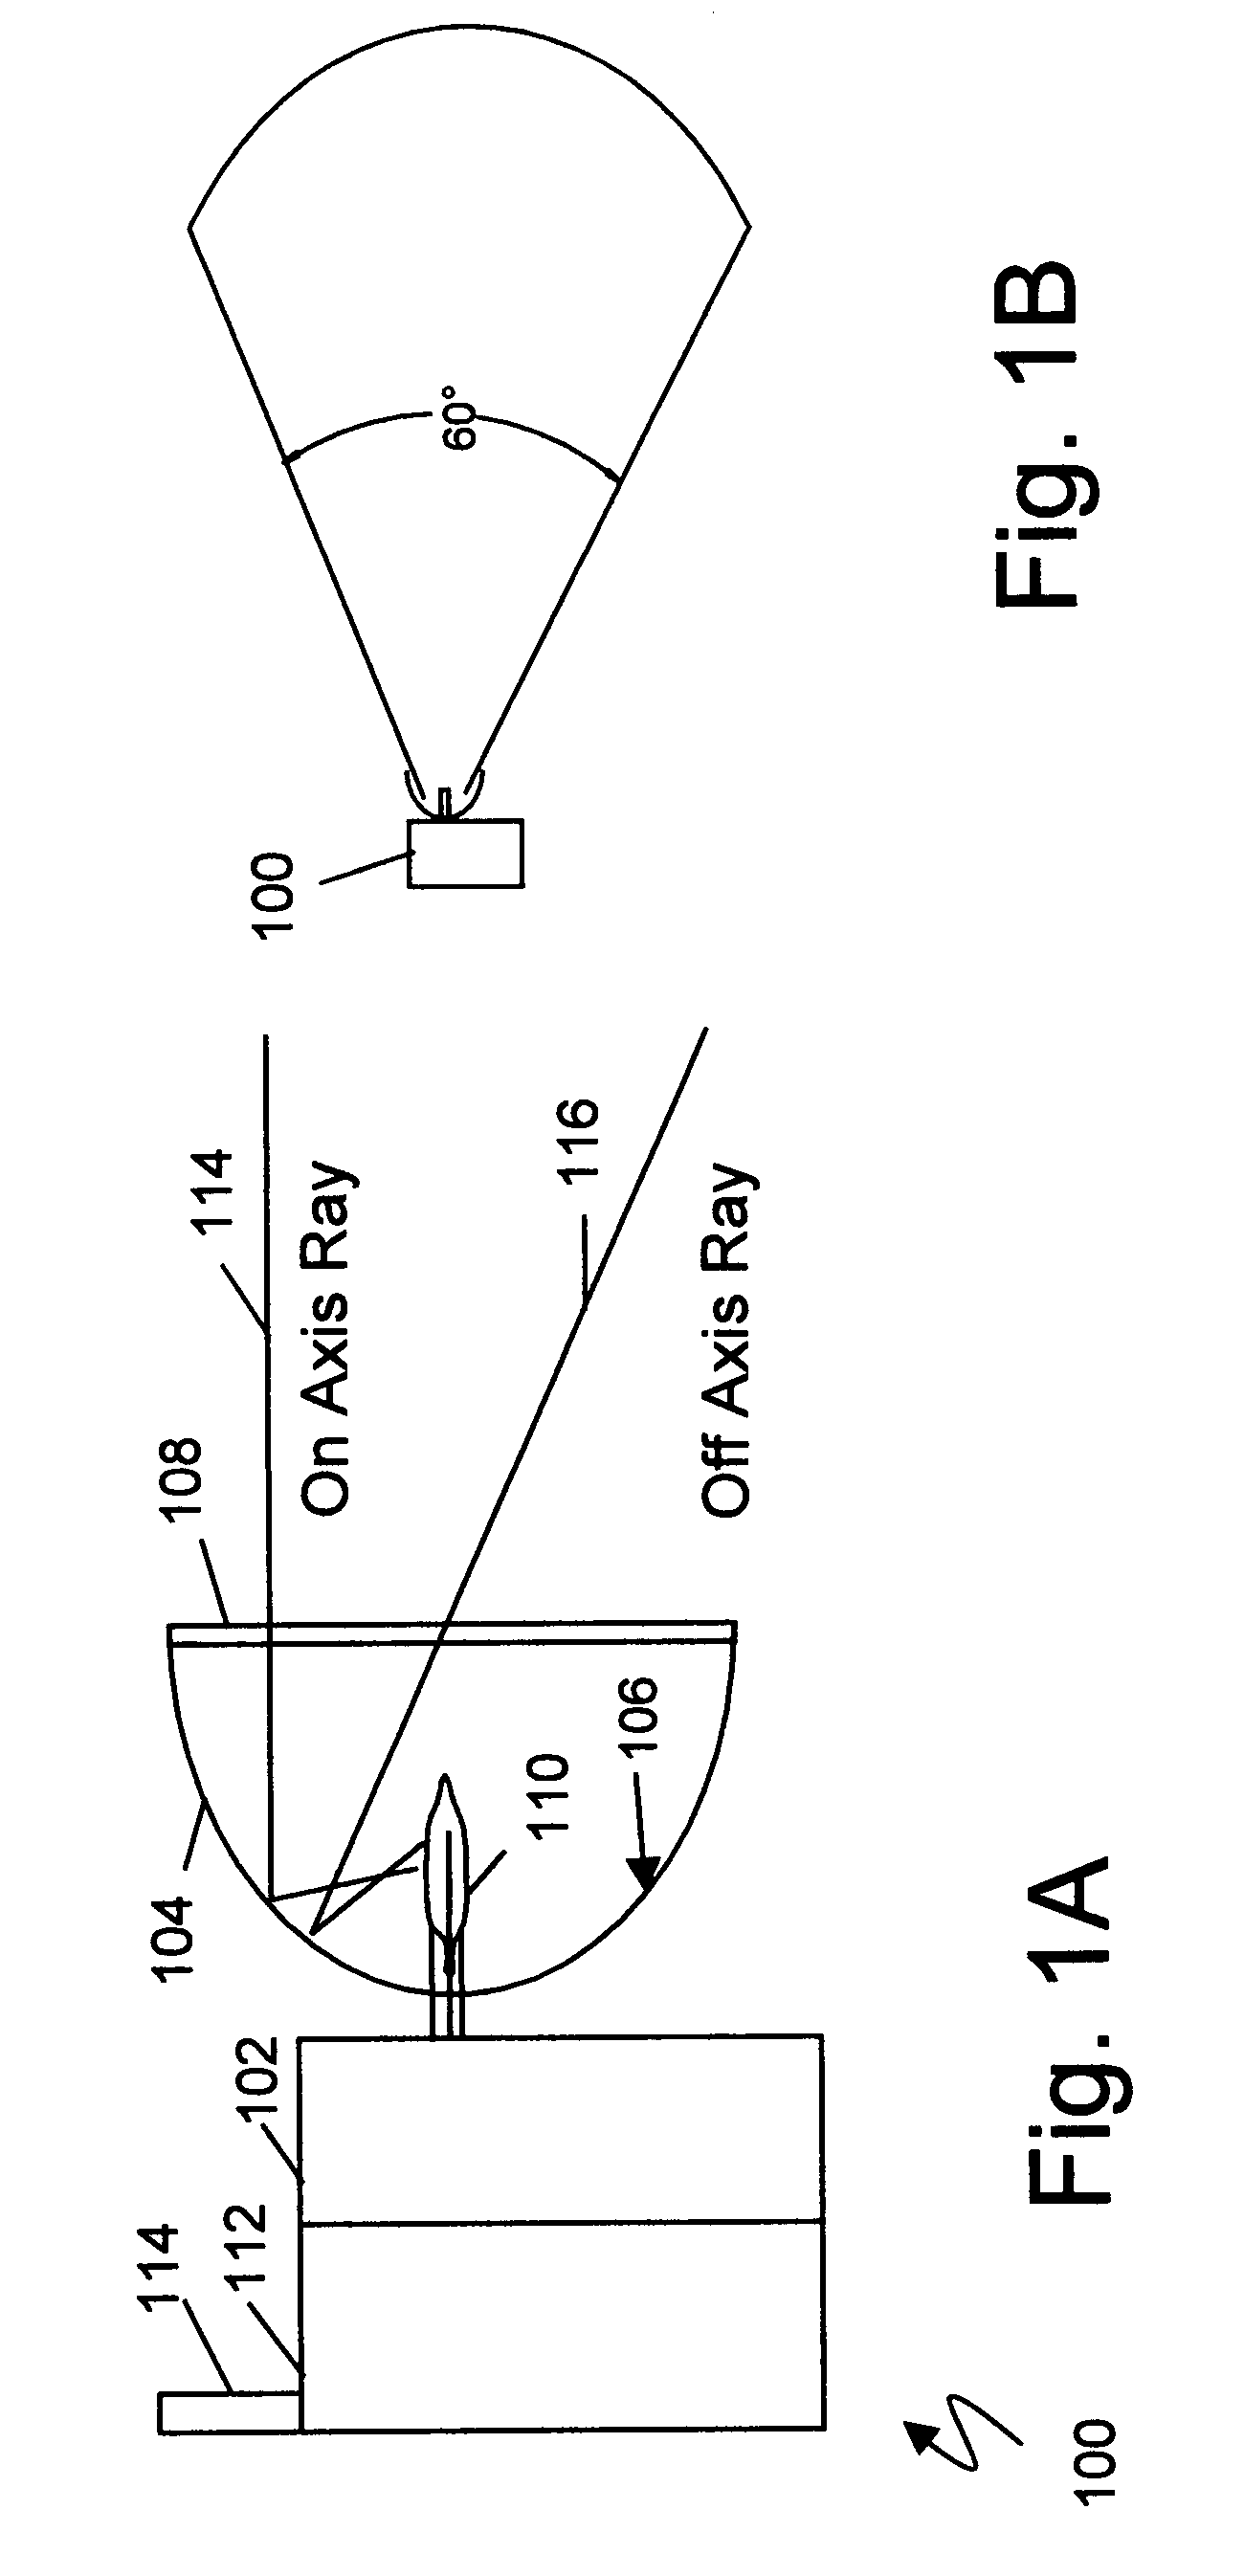 Optical flame detection system and method